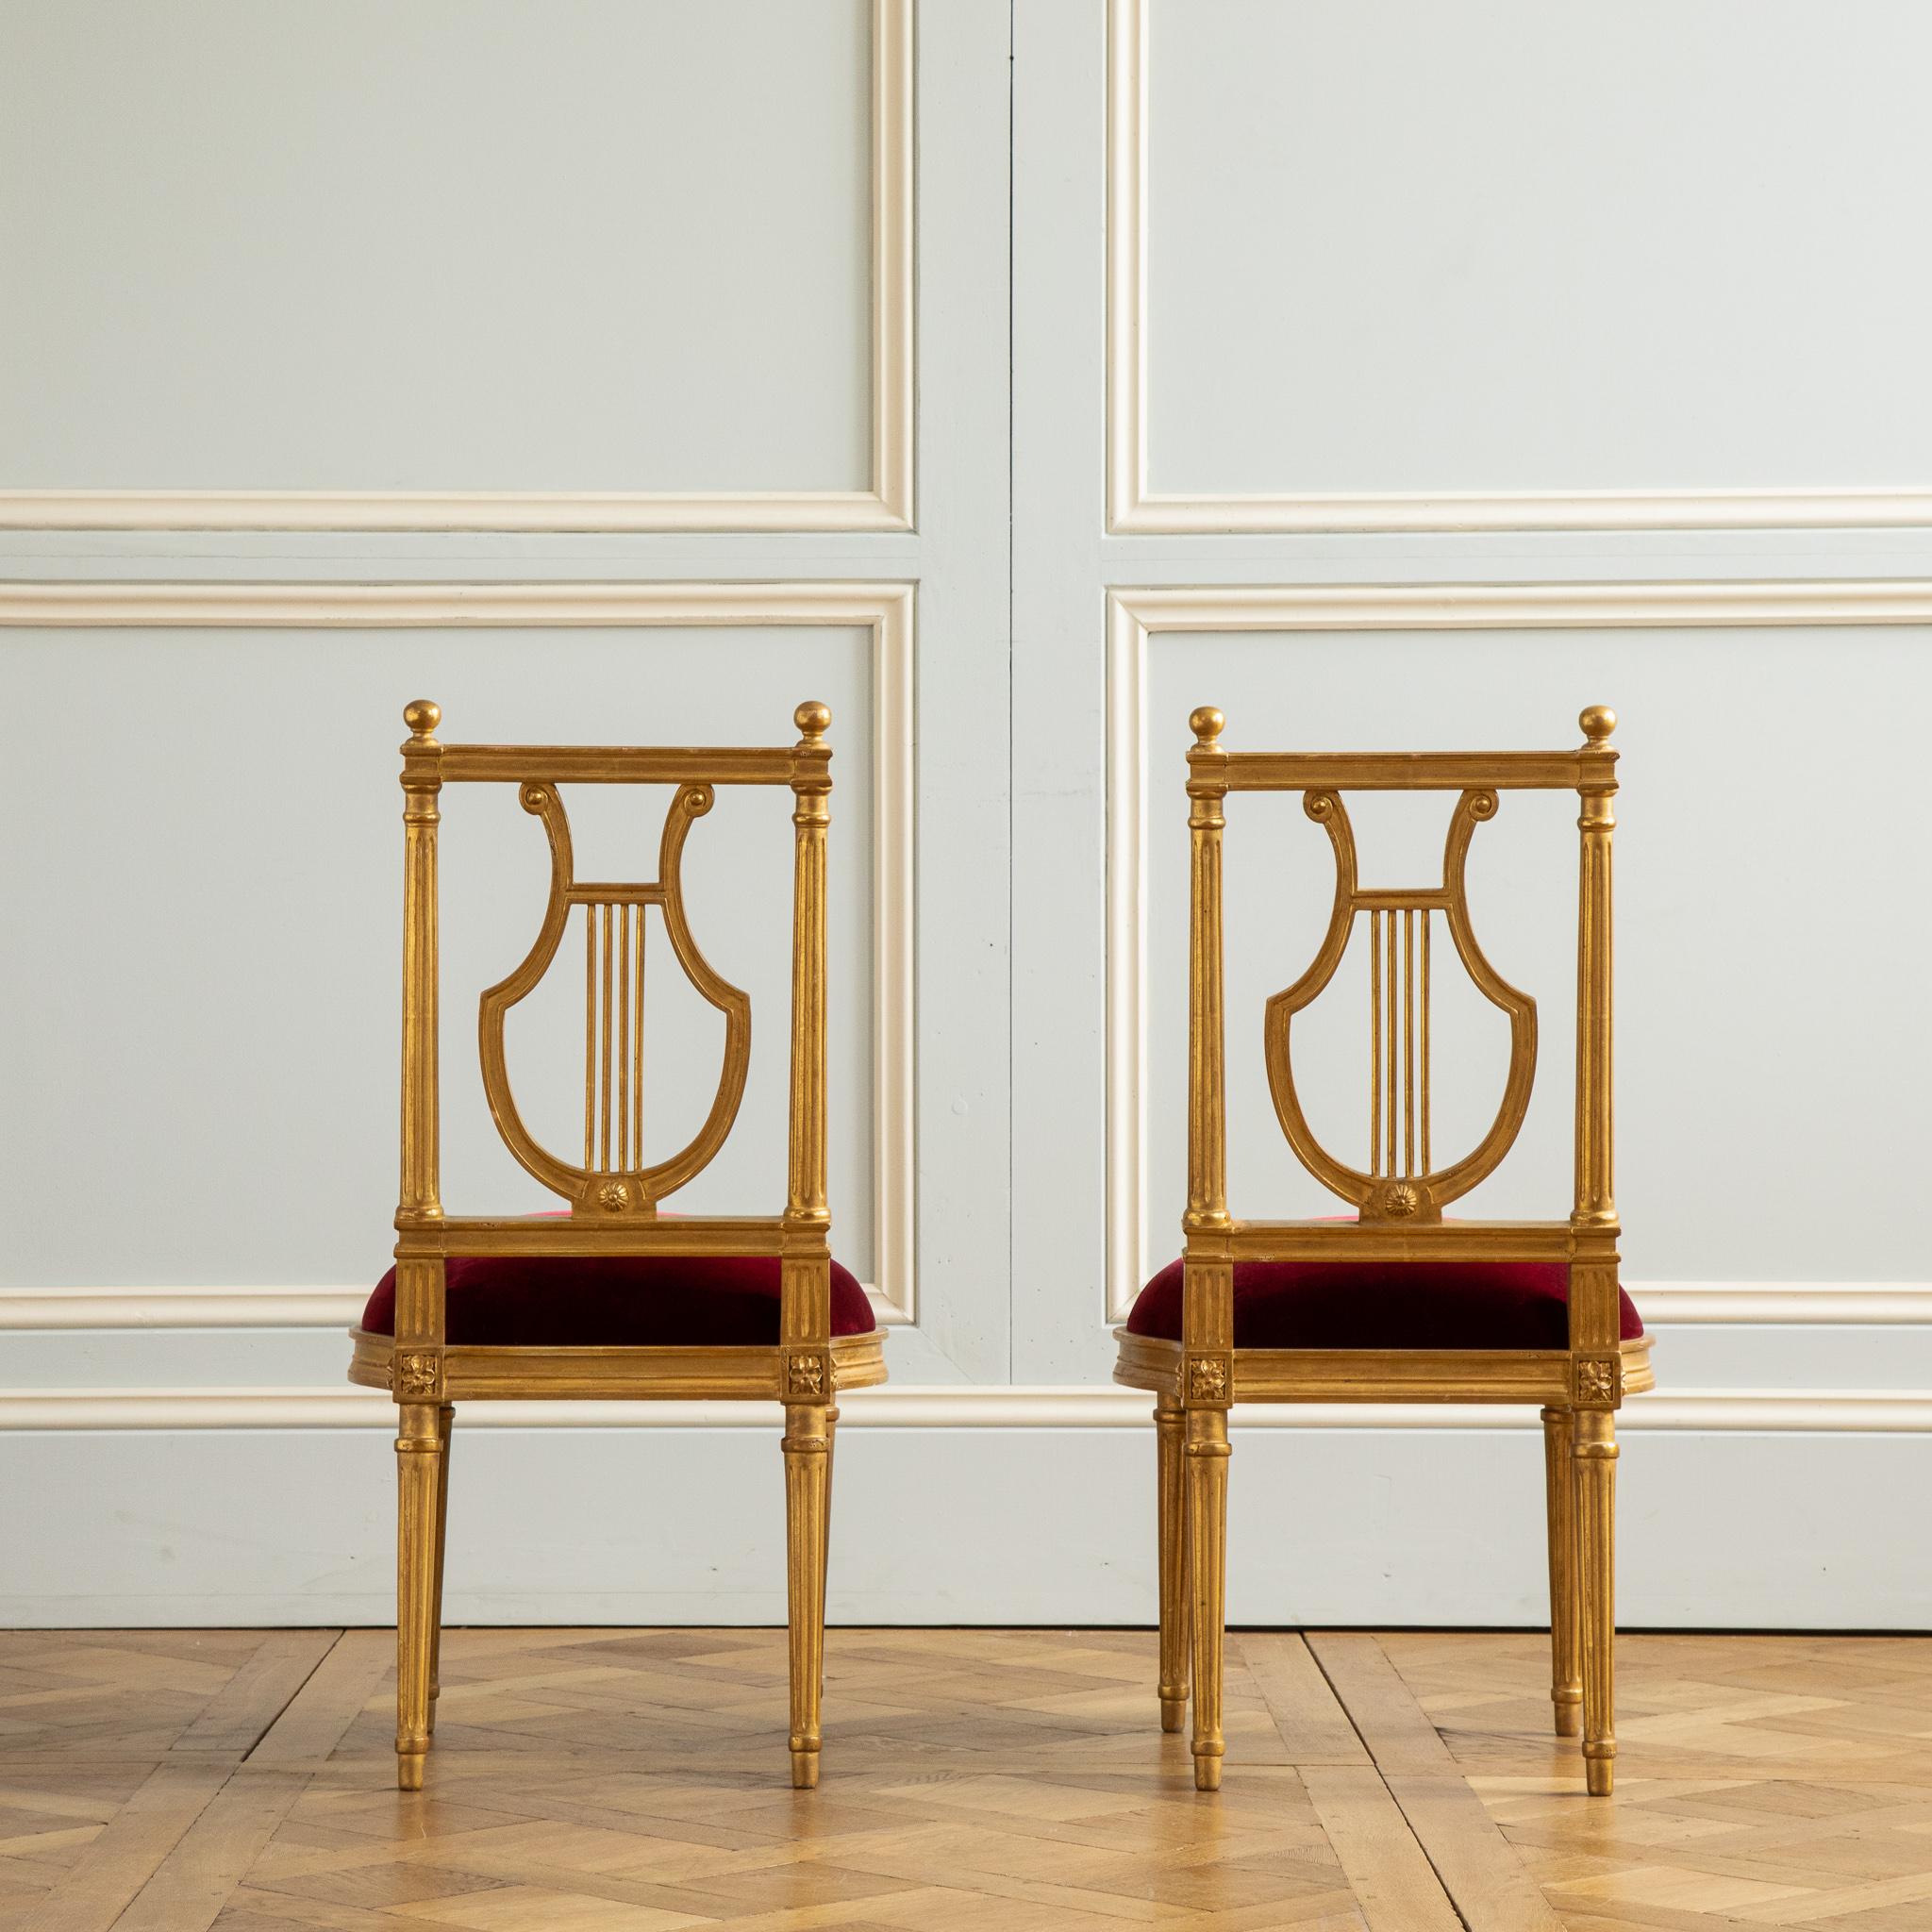 Contemporary Louis XVI Gilded Lyre Chairs with Deep Red Velvet Inspired by Jacob For Sale